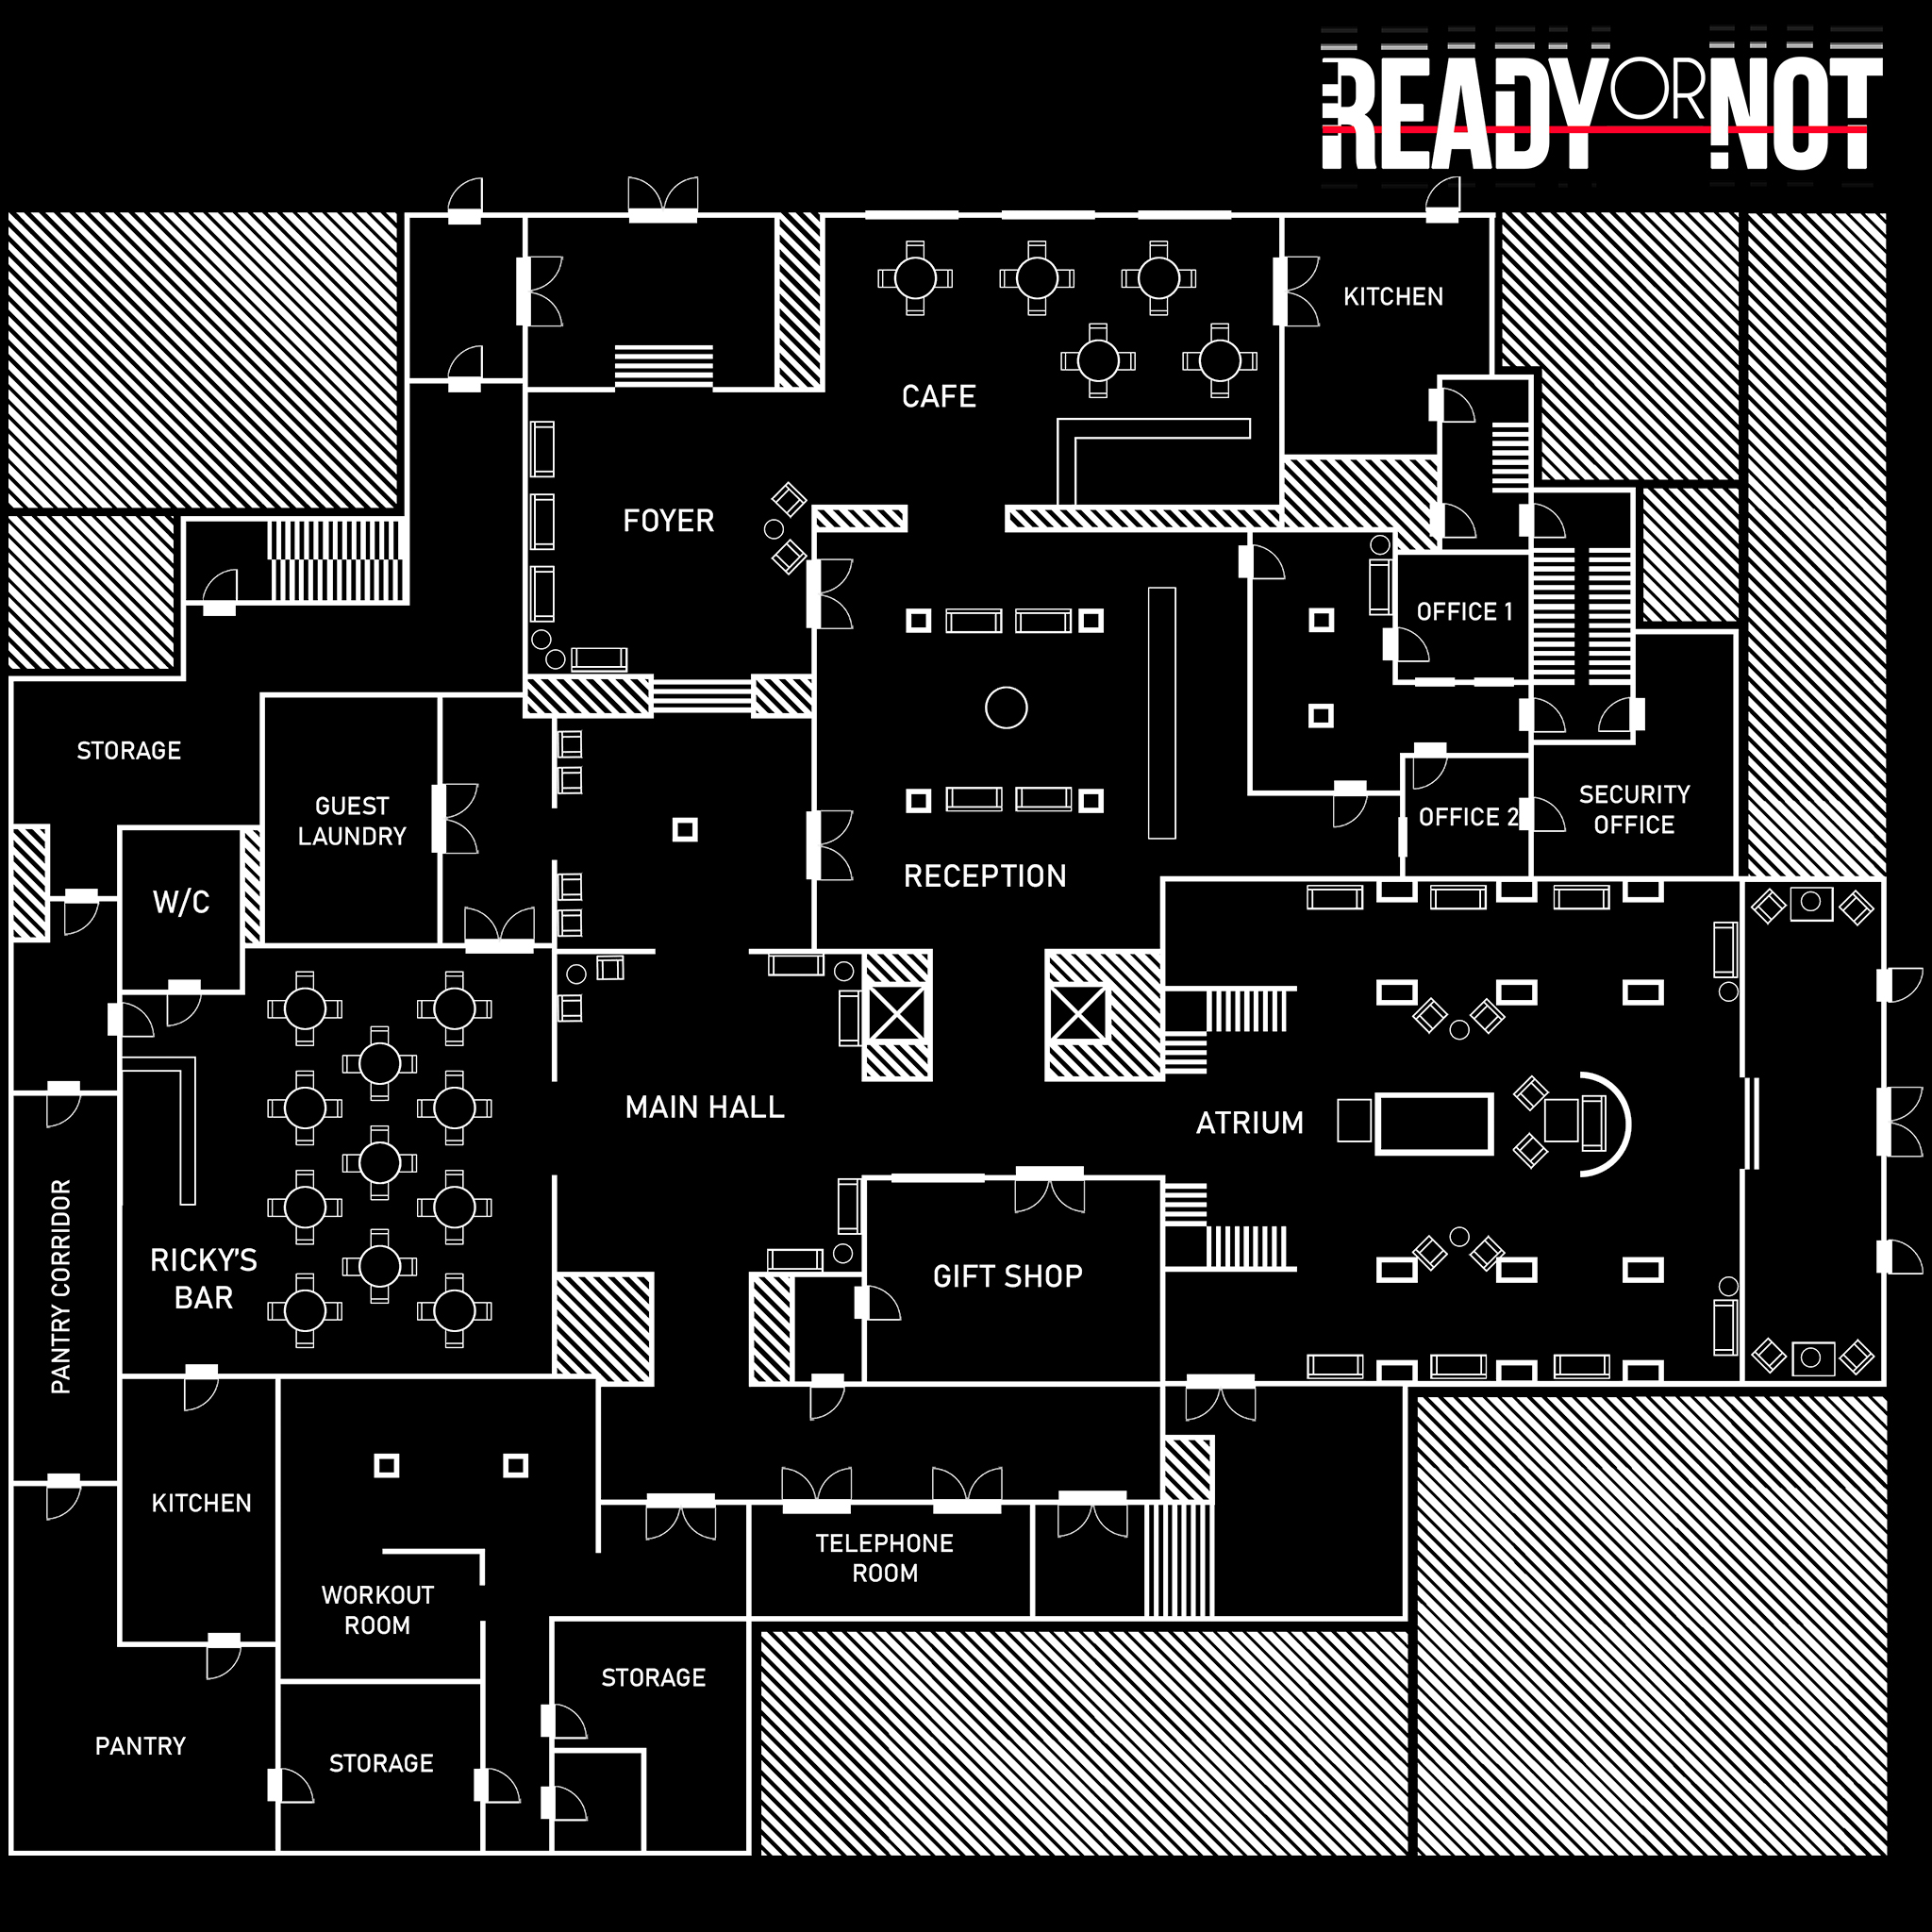 Read Or Not | Map Blueprints image 14